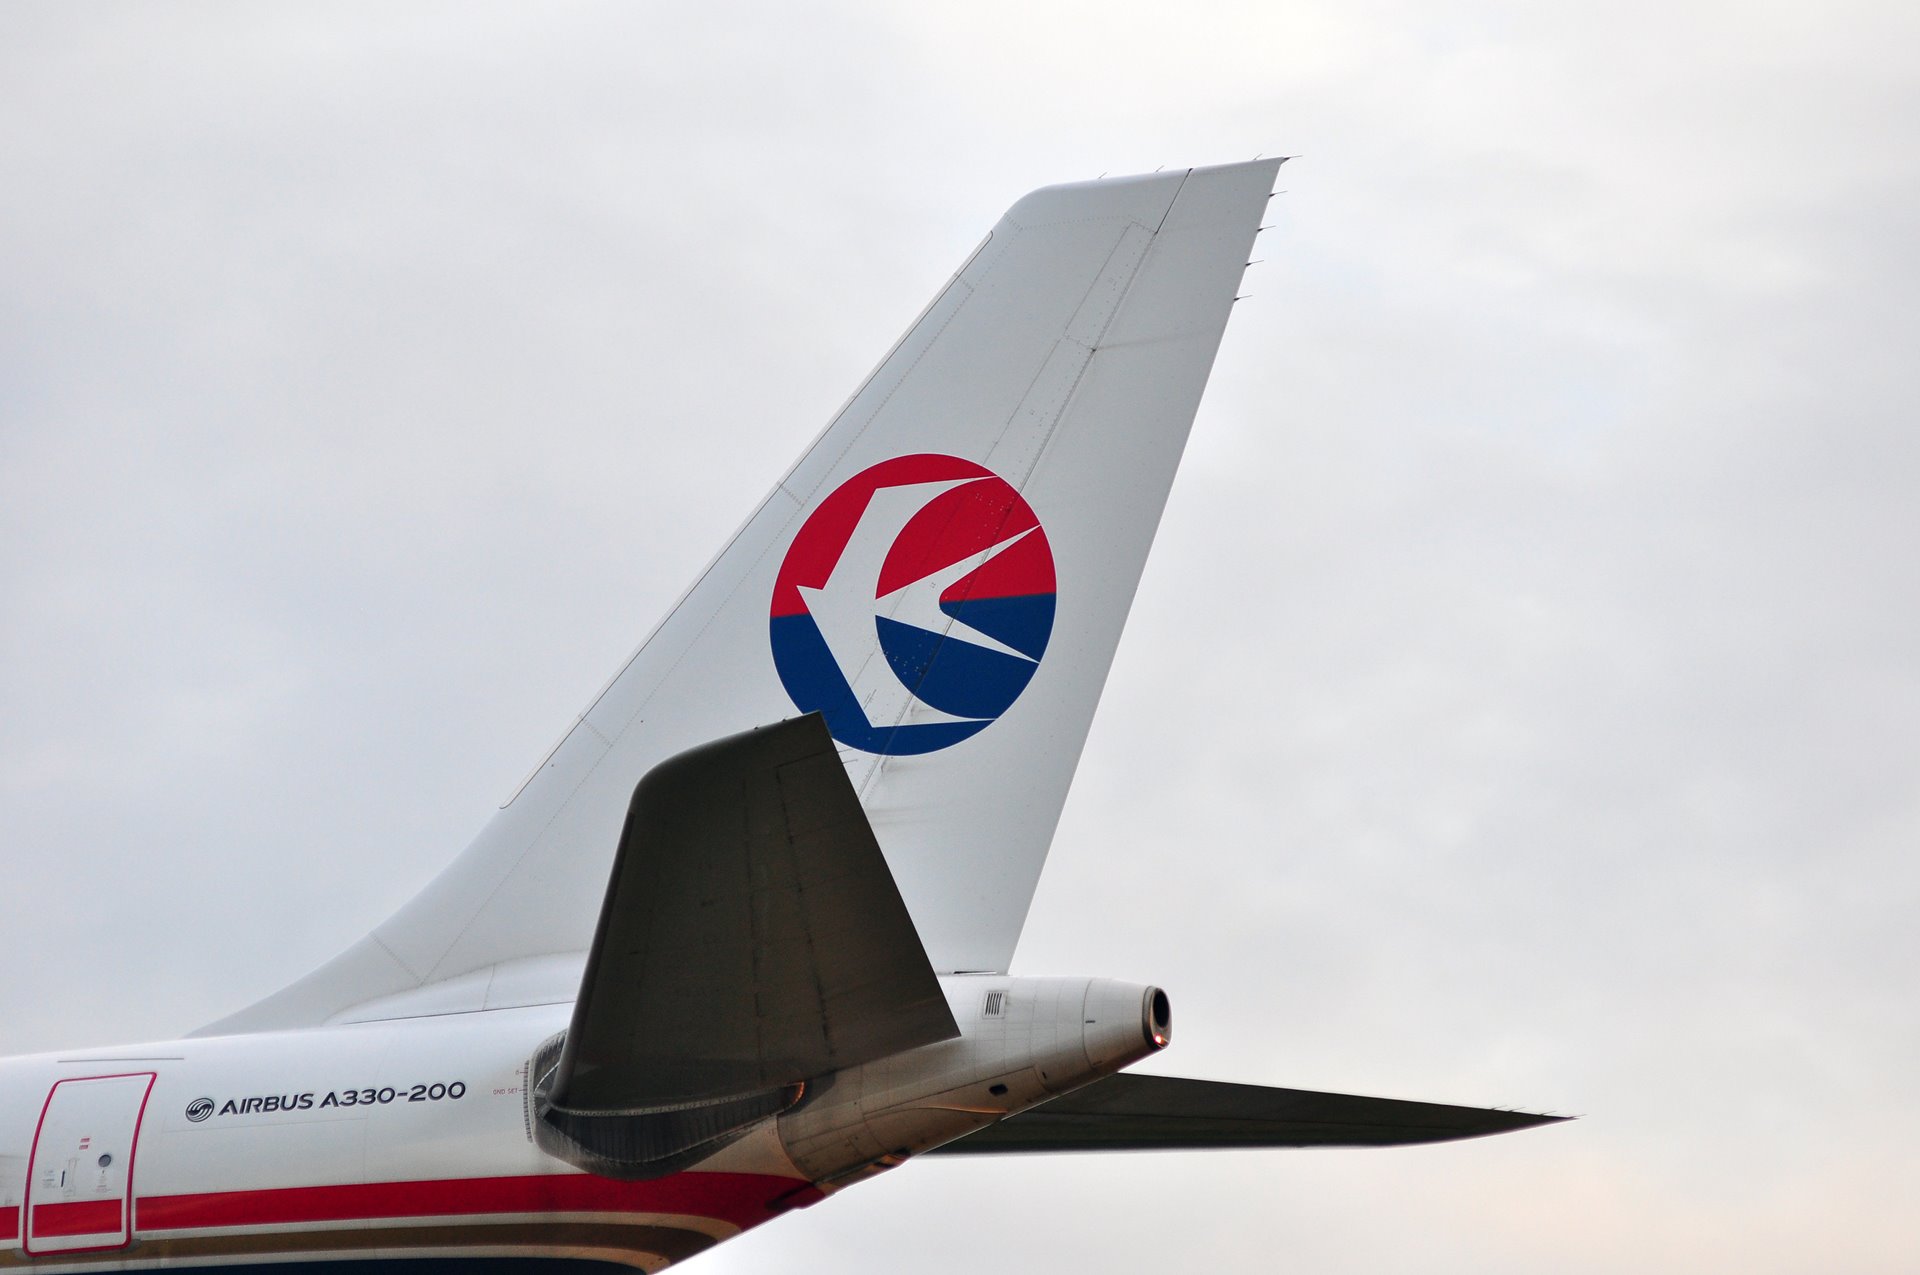 CHARTER FLIGHTS BETWEEN CHINA AND PITTSBURGH INTERNATIONAL AIRPORT WILL LAUNCH TOMORROW